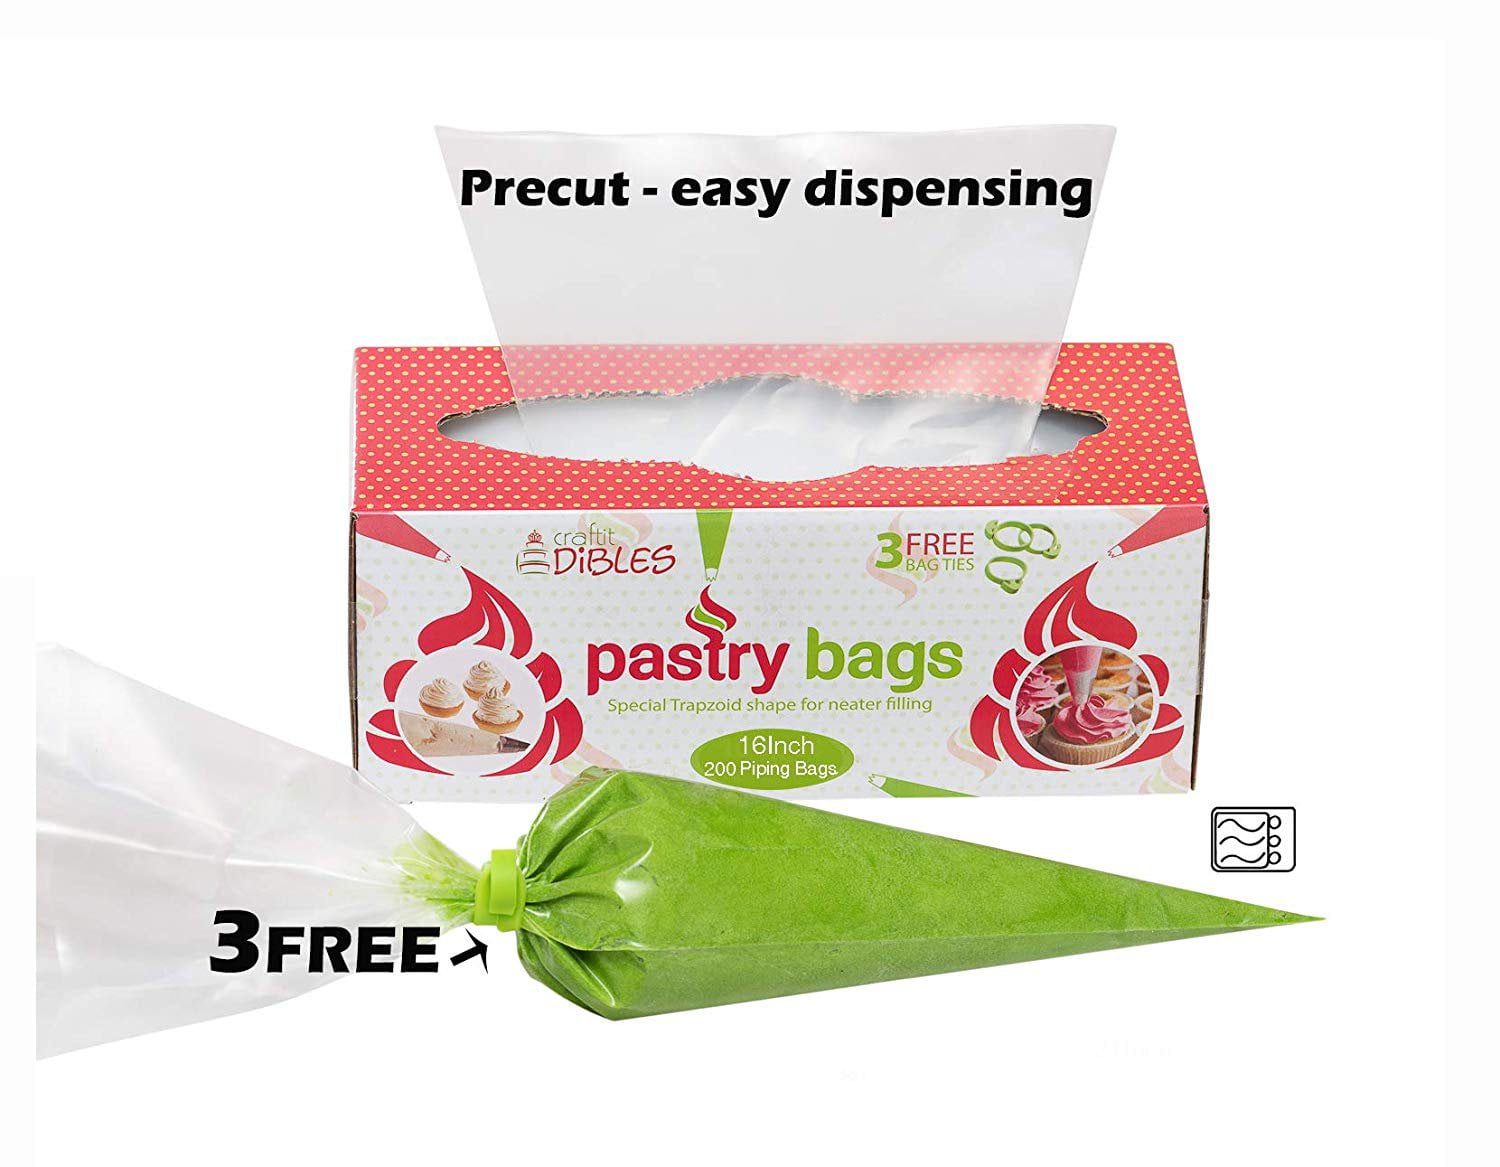 Piping Bags Disposable 200 Pack - 16 Inch Cake Decorating Pastry Bag Set in  Dispenser box, With 3 Free Icing Bag Ties. Extra Thick Frosting Bags 